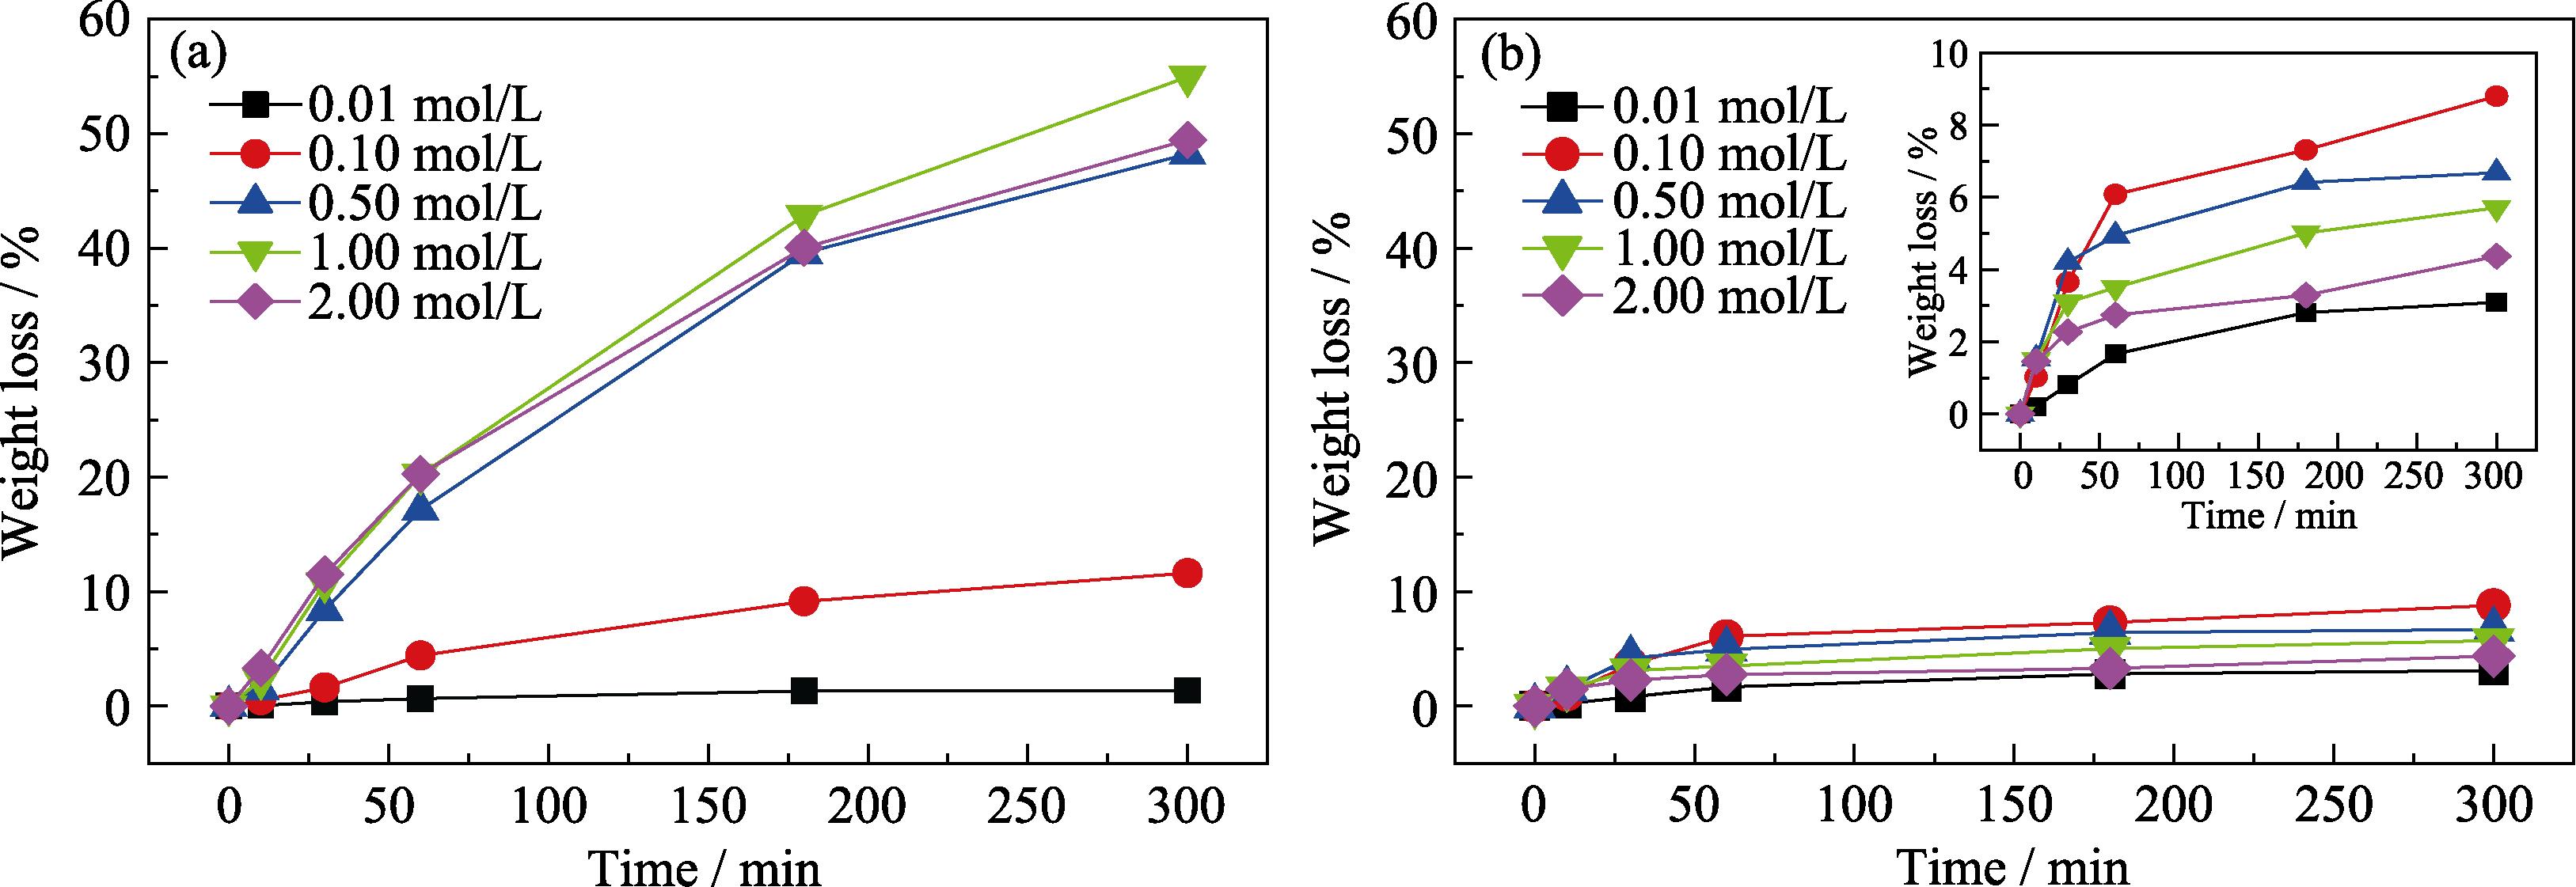 Variation of weight loss with corrosion time after corrosion of samples in different concentrations of acid solutions